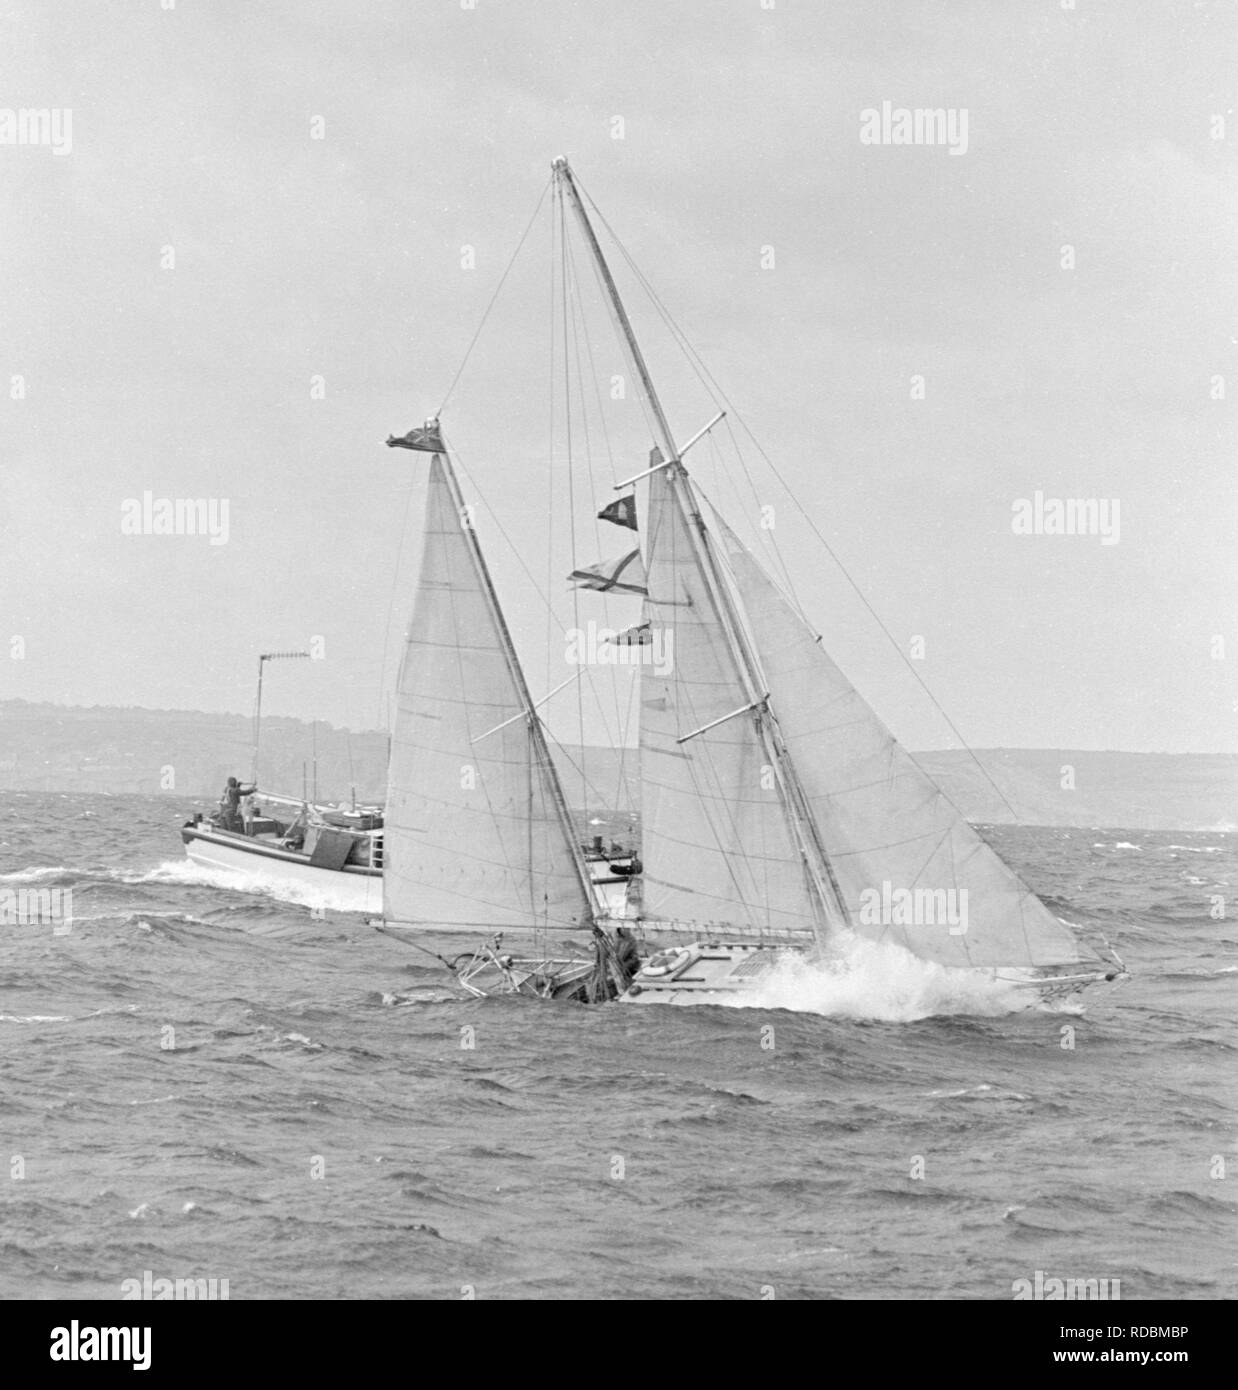 Lone non-stop round the world yachtsman, Robin Knox-Johnston in his 32ft ketch Suhaili, pictured in the rough seas off Falmouth. Stock Photo